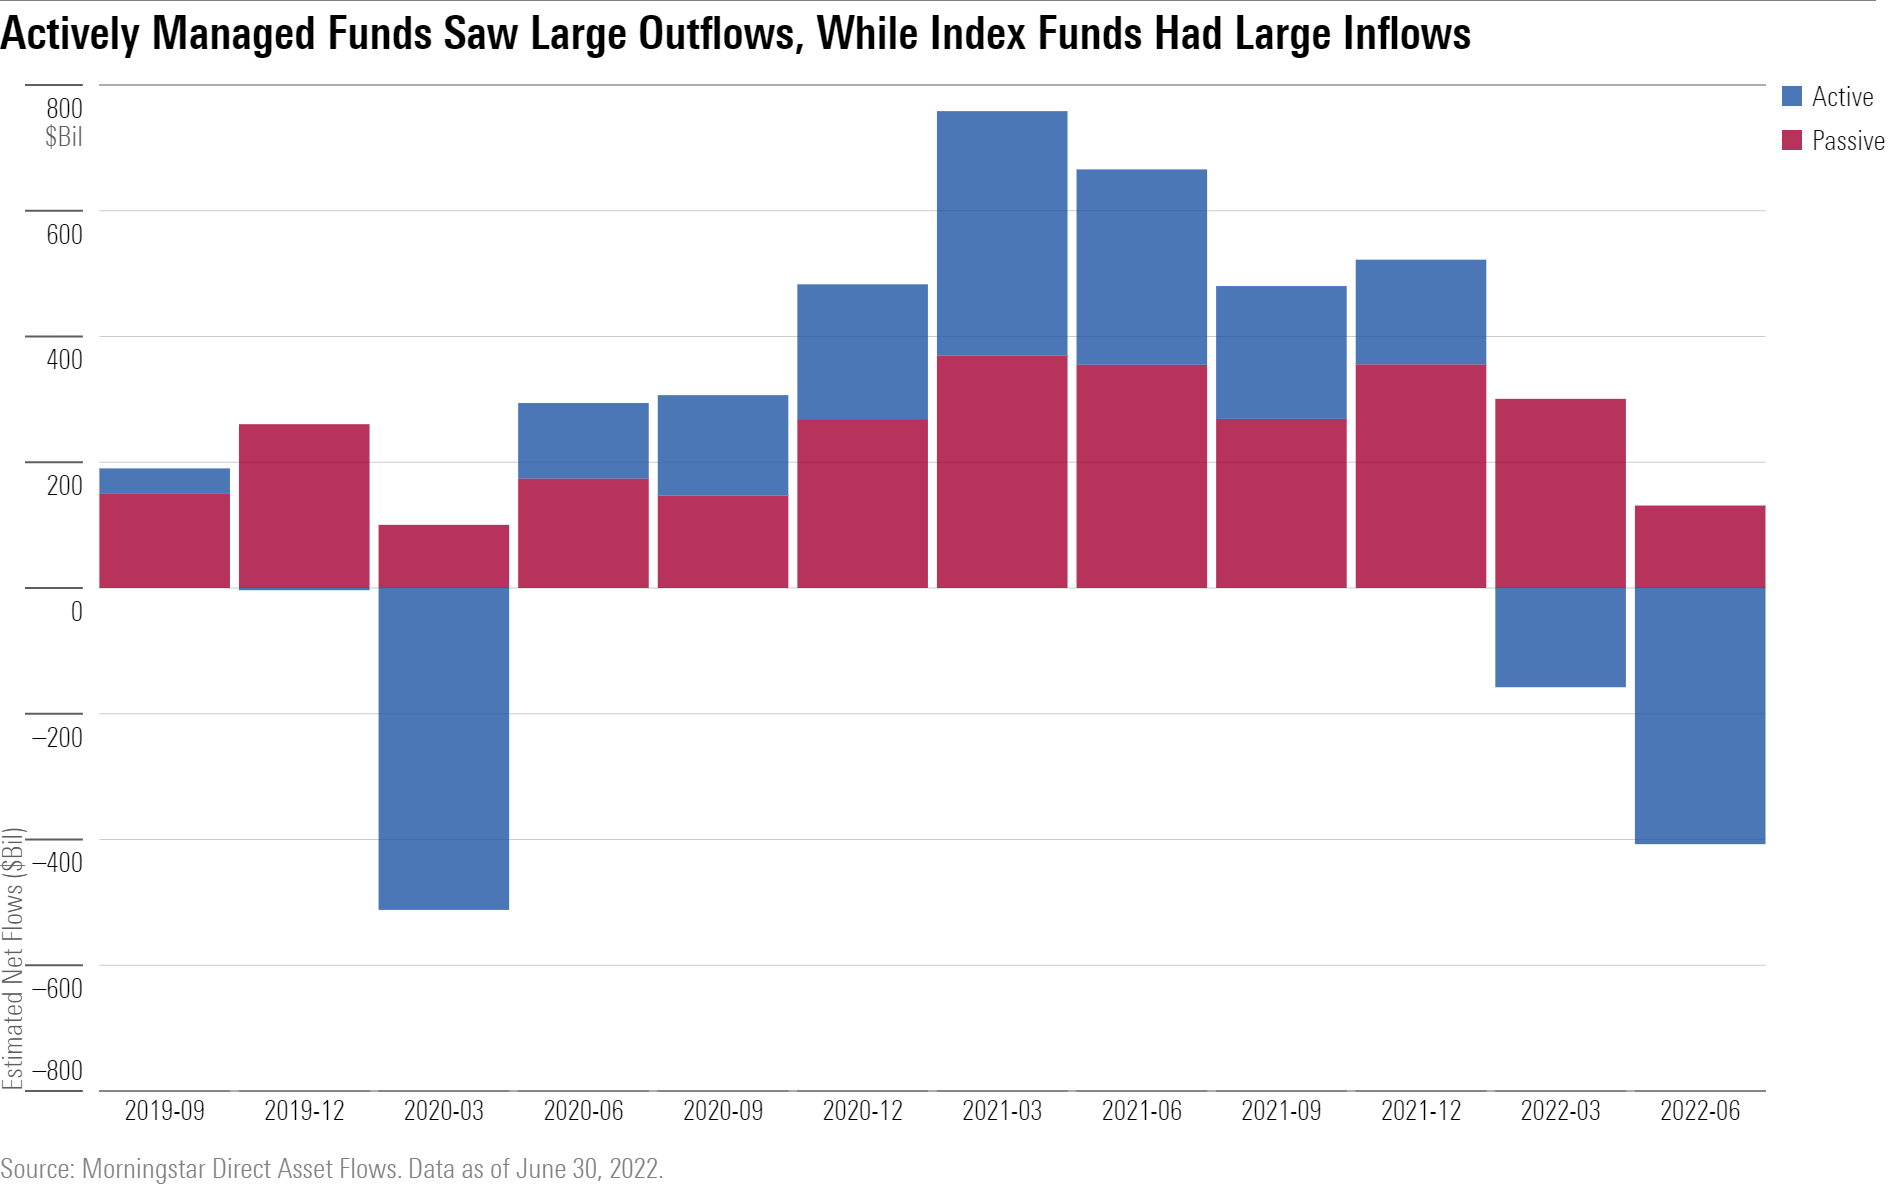 Globally, passive funds had inflows in the first half of 2022 while active funds had outflows.